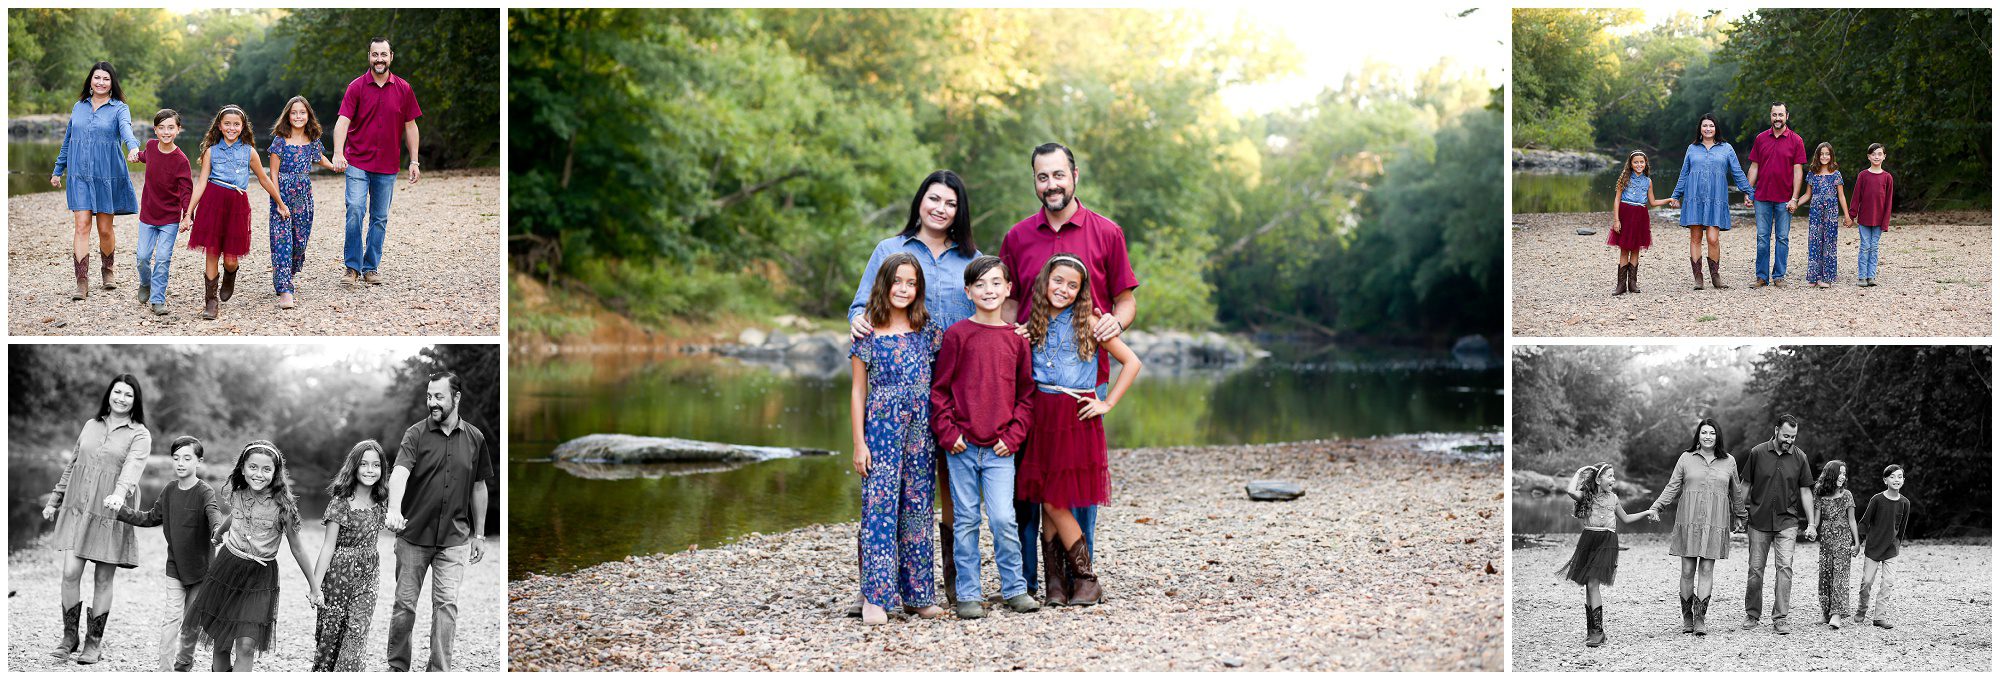 Fluvanna Triplet Family Portraits by the River Charlottesville Photographer Pictures Siblings Photography Photoshoot Session Summer Fall Brother Sisters Dog